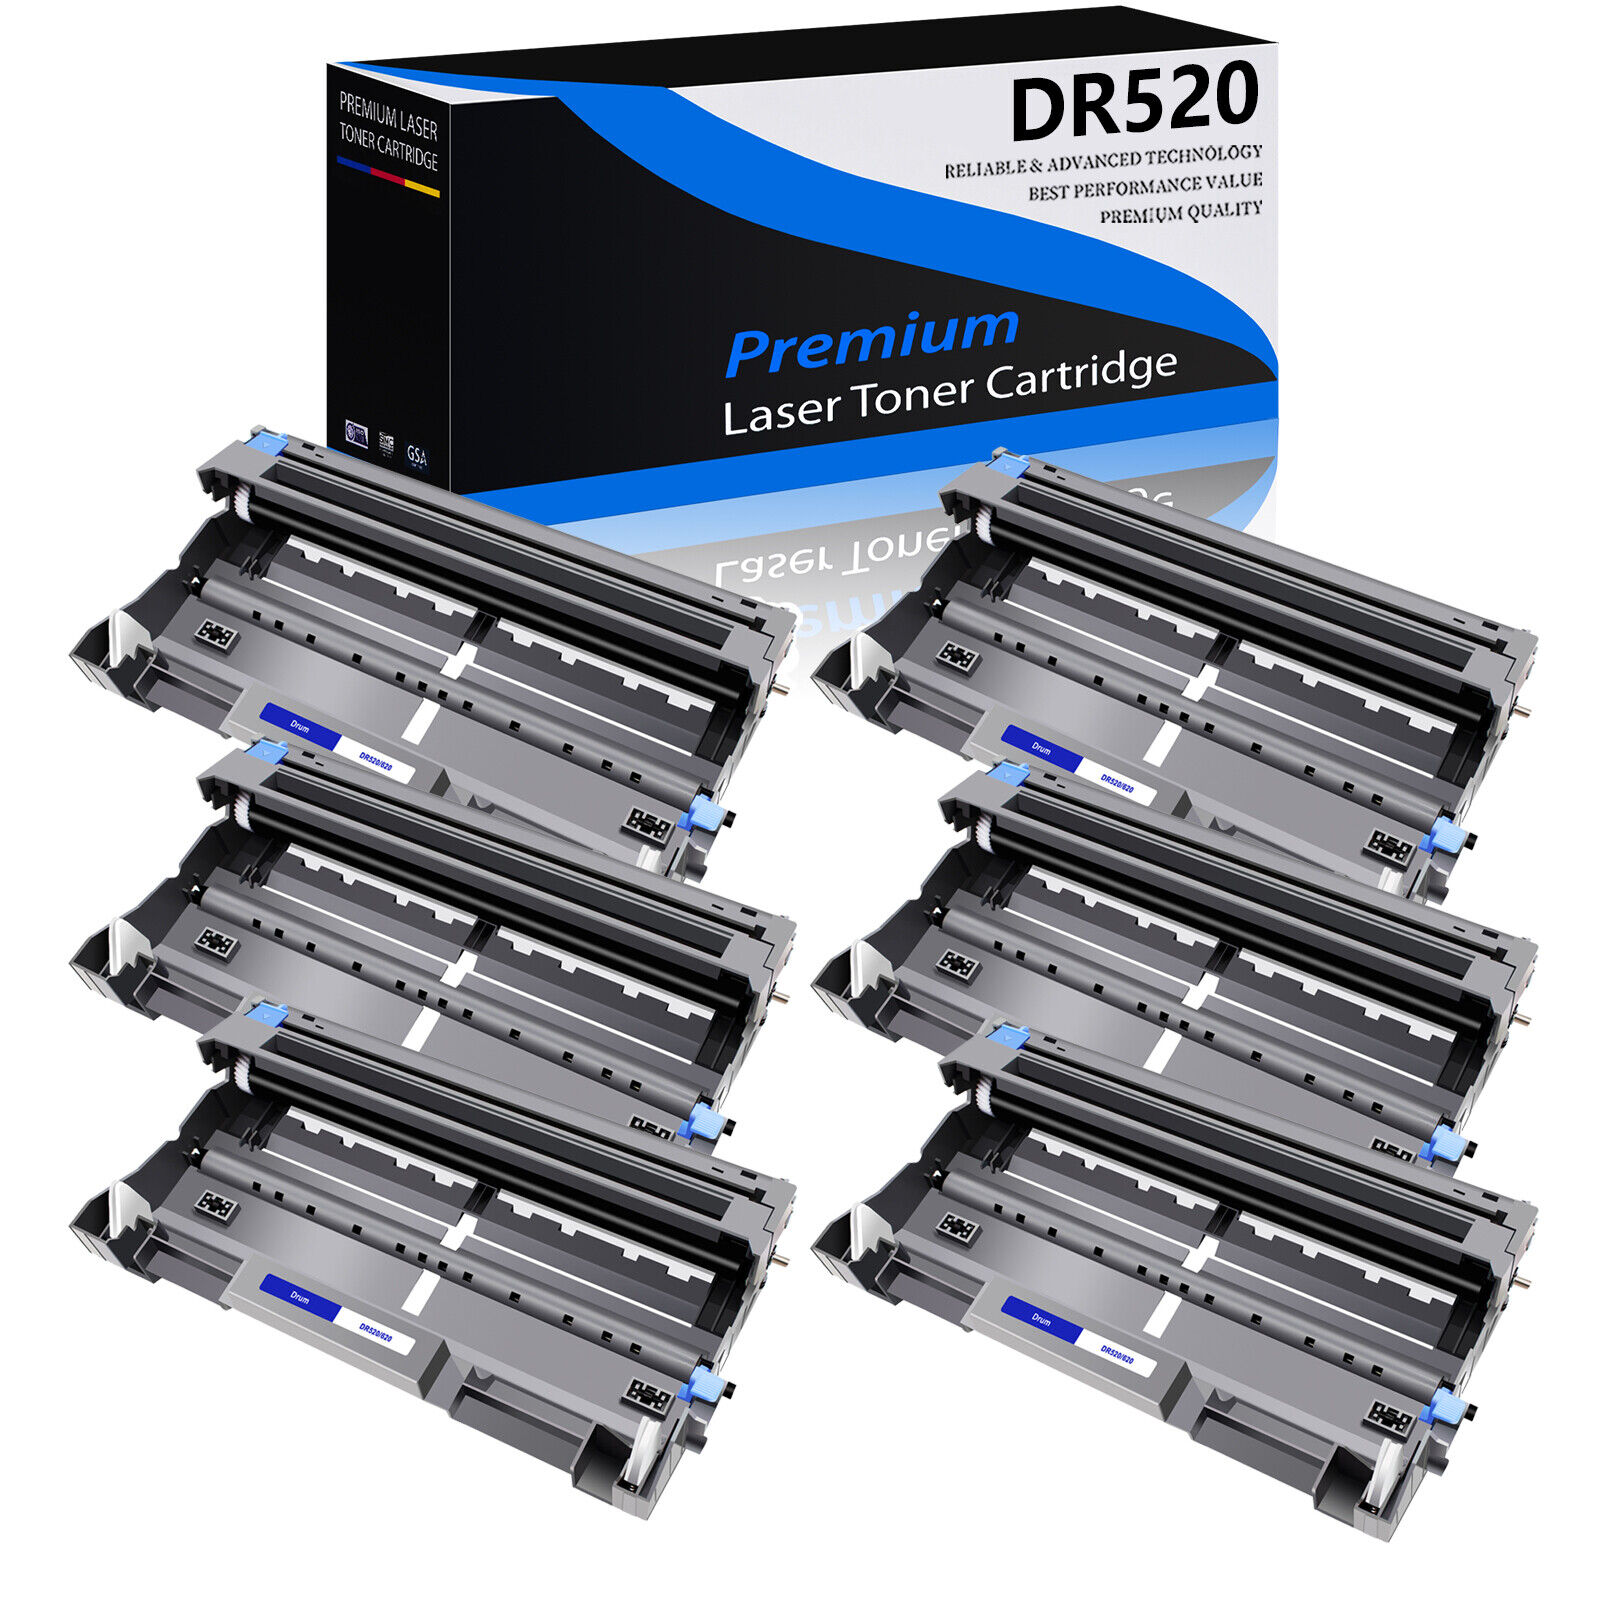 6 Pack High Yield DR-520 Drum Unit for Brother DCP-8060 DCP-8065 DCP-8065DN